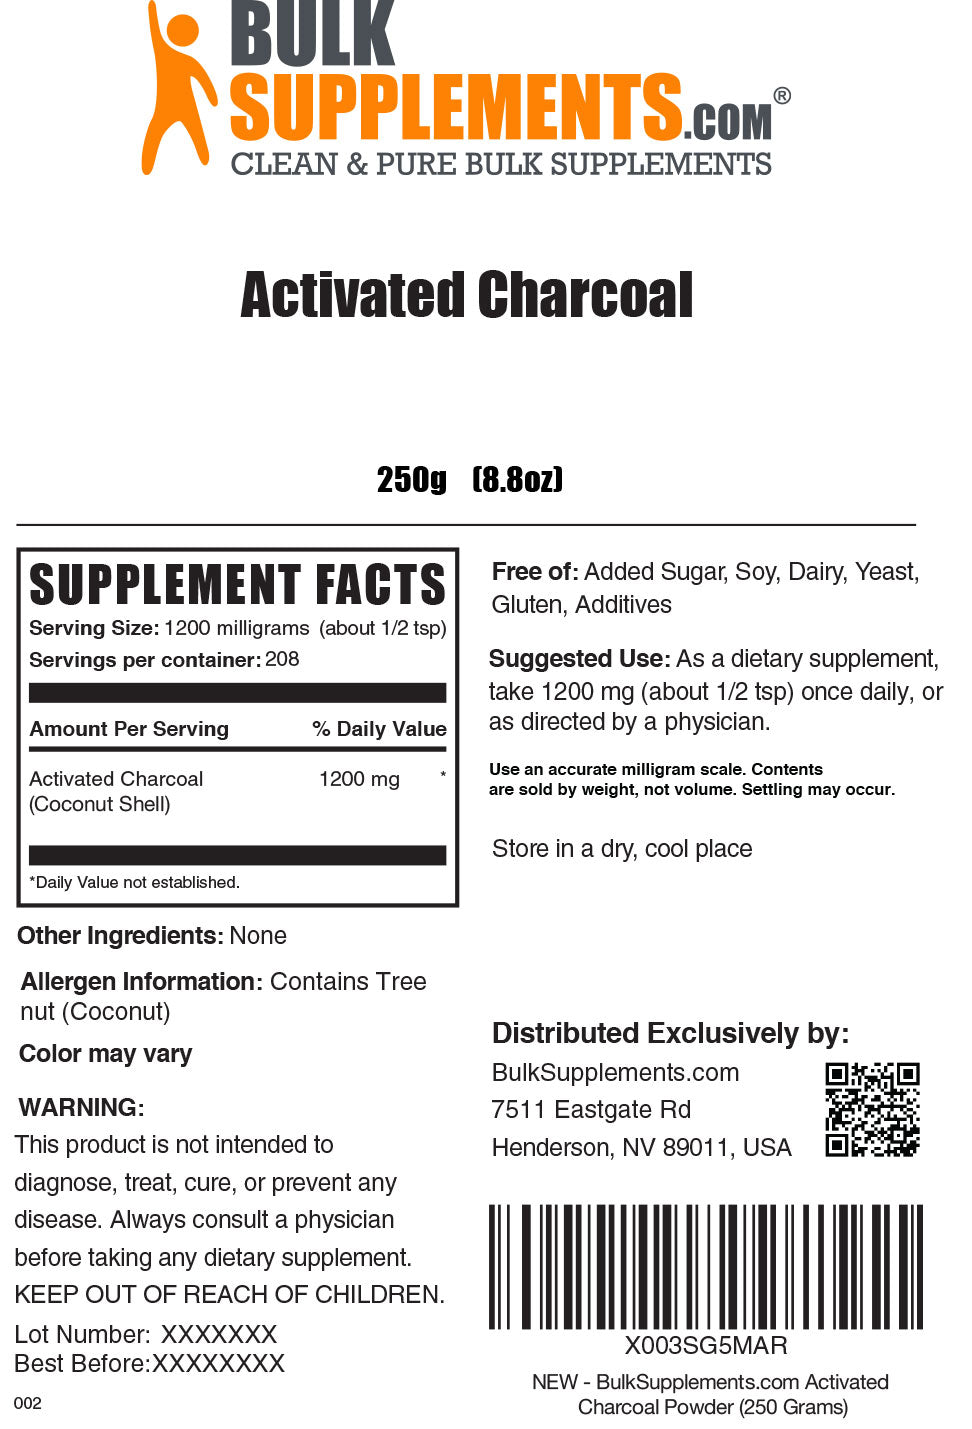 Activated Charcoal supplement facts